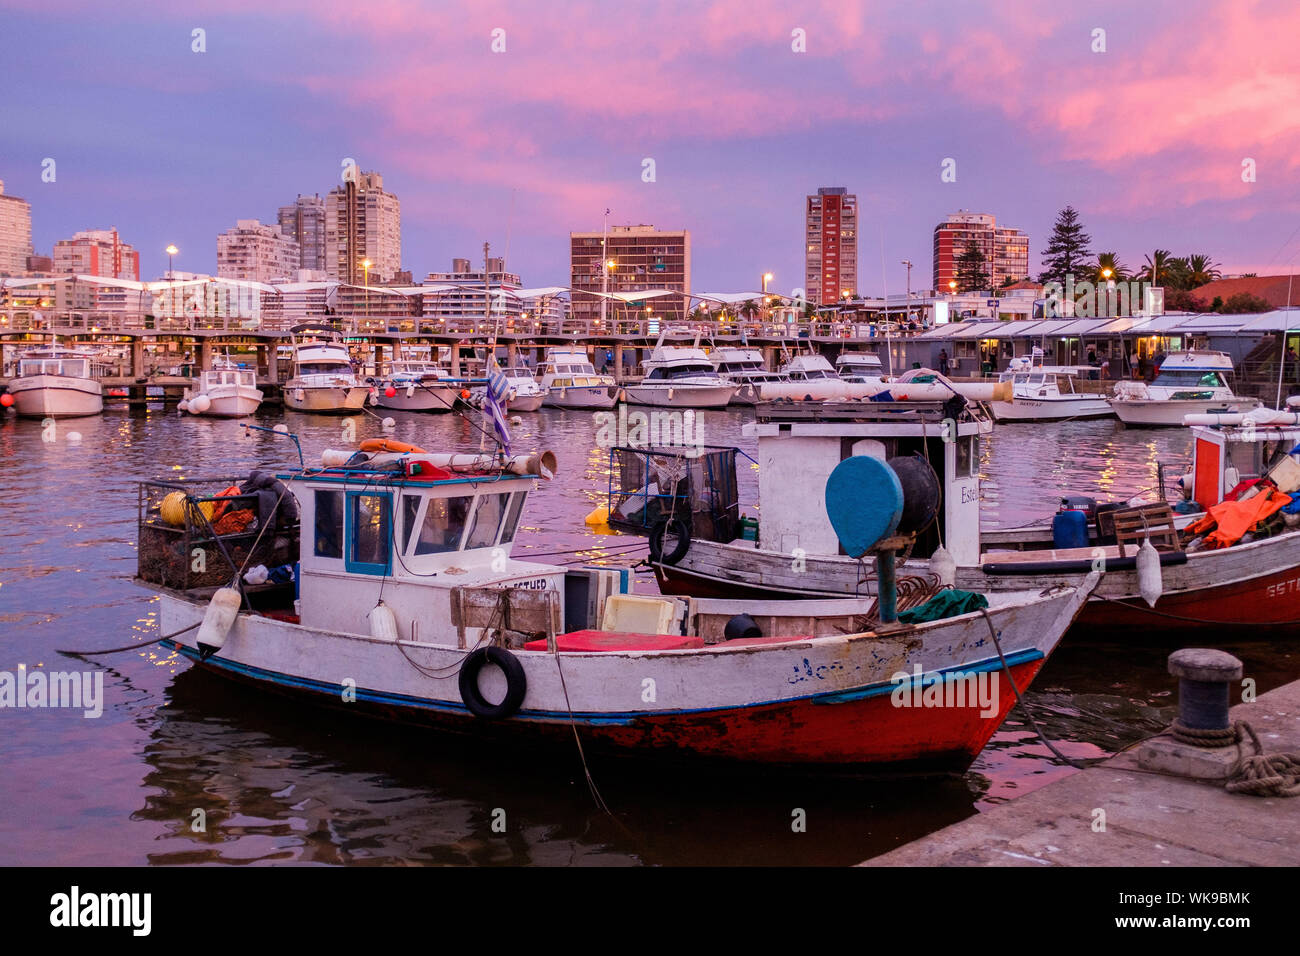 Uruguay: Punta del Este, city and seaside resort, a destination for the Argentinean and Brazilian jet set. At nightfall, the fishing port with traditi Stock Photo